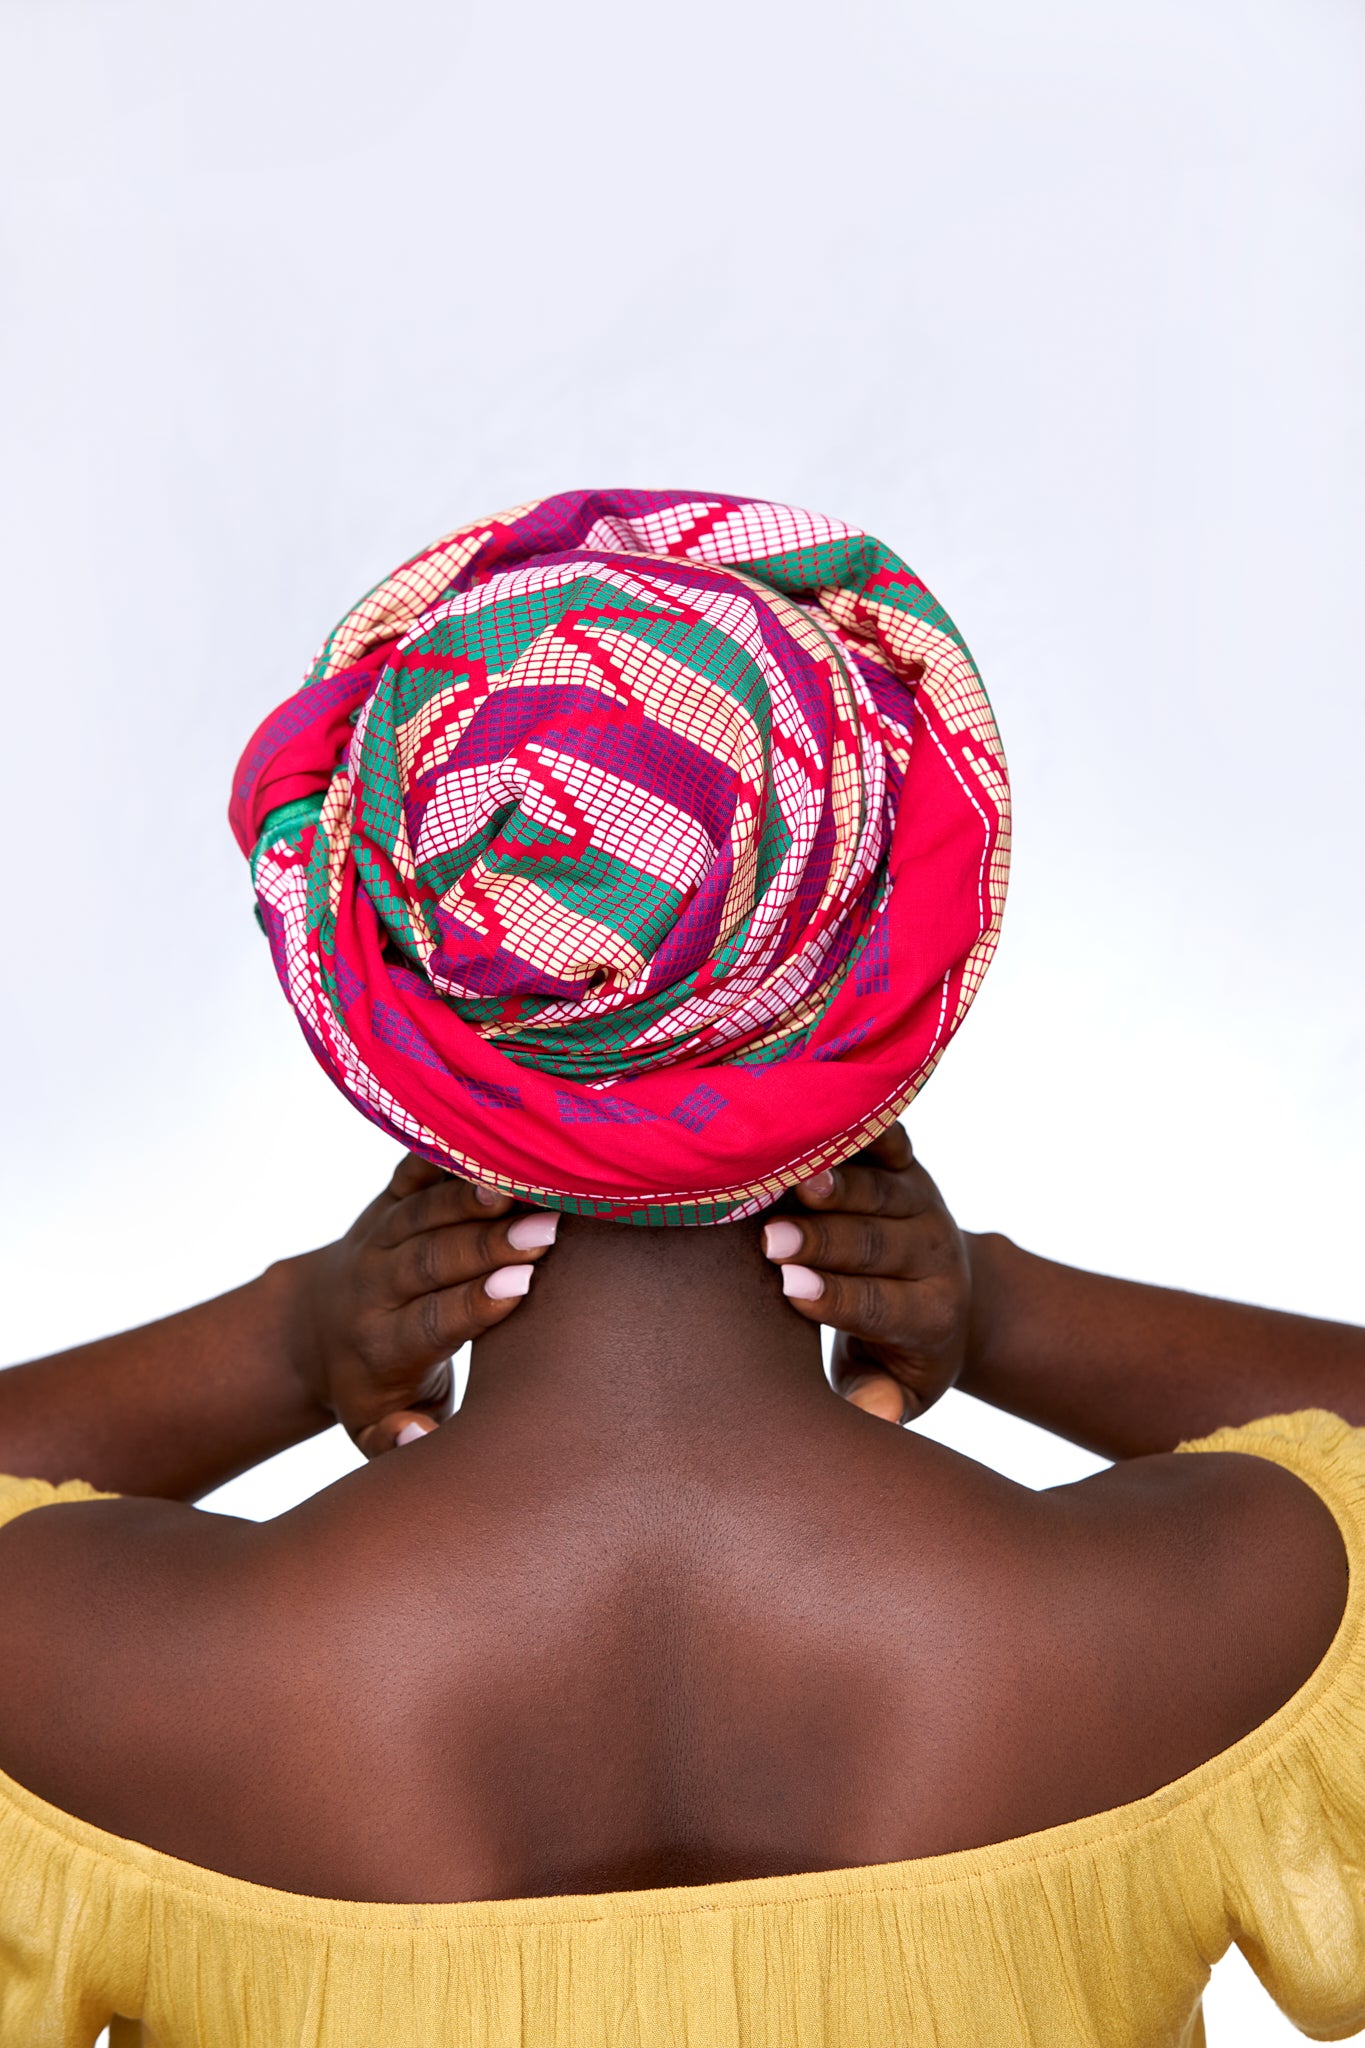 Ghanaian High Quality Cotton Made Kente,Pink, White, Green,Gold Coloured Detachable Silklined Headwrap